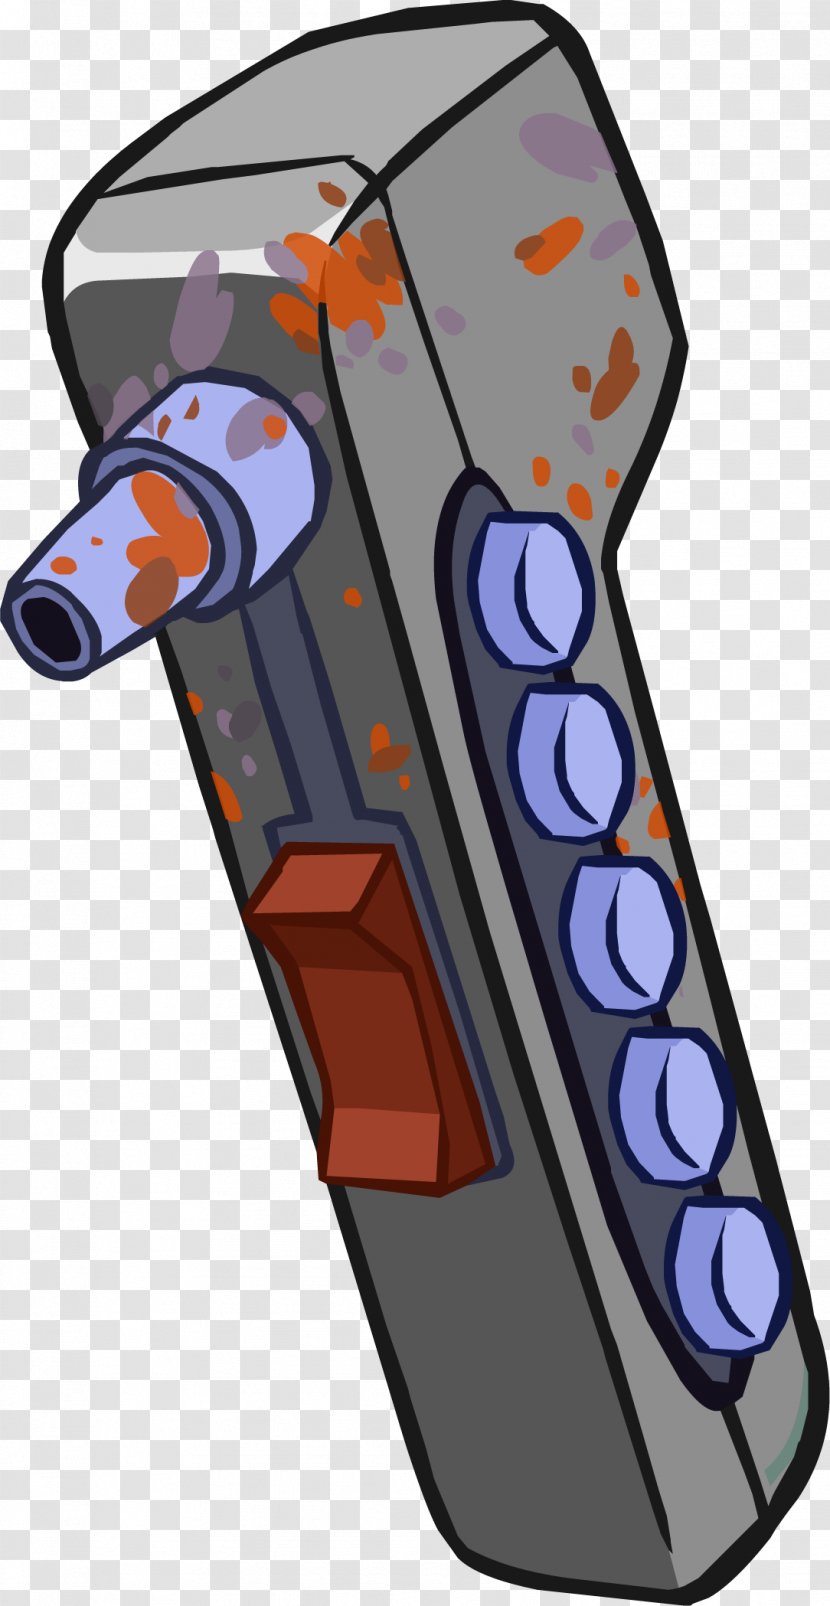 Club Penguin Video Game Pistol Wikia - Wiki Transparent PNG